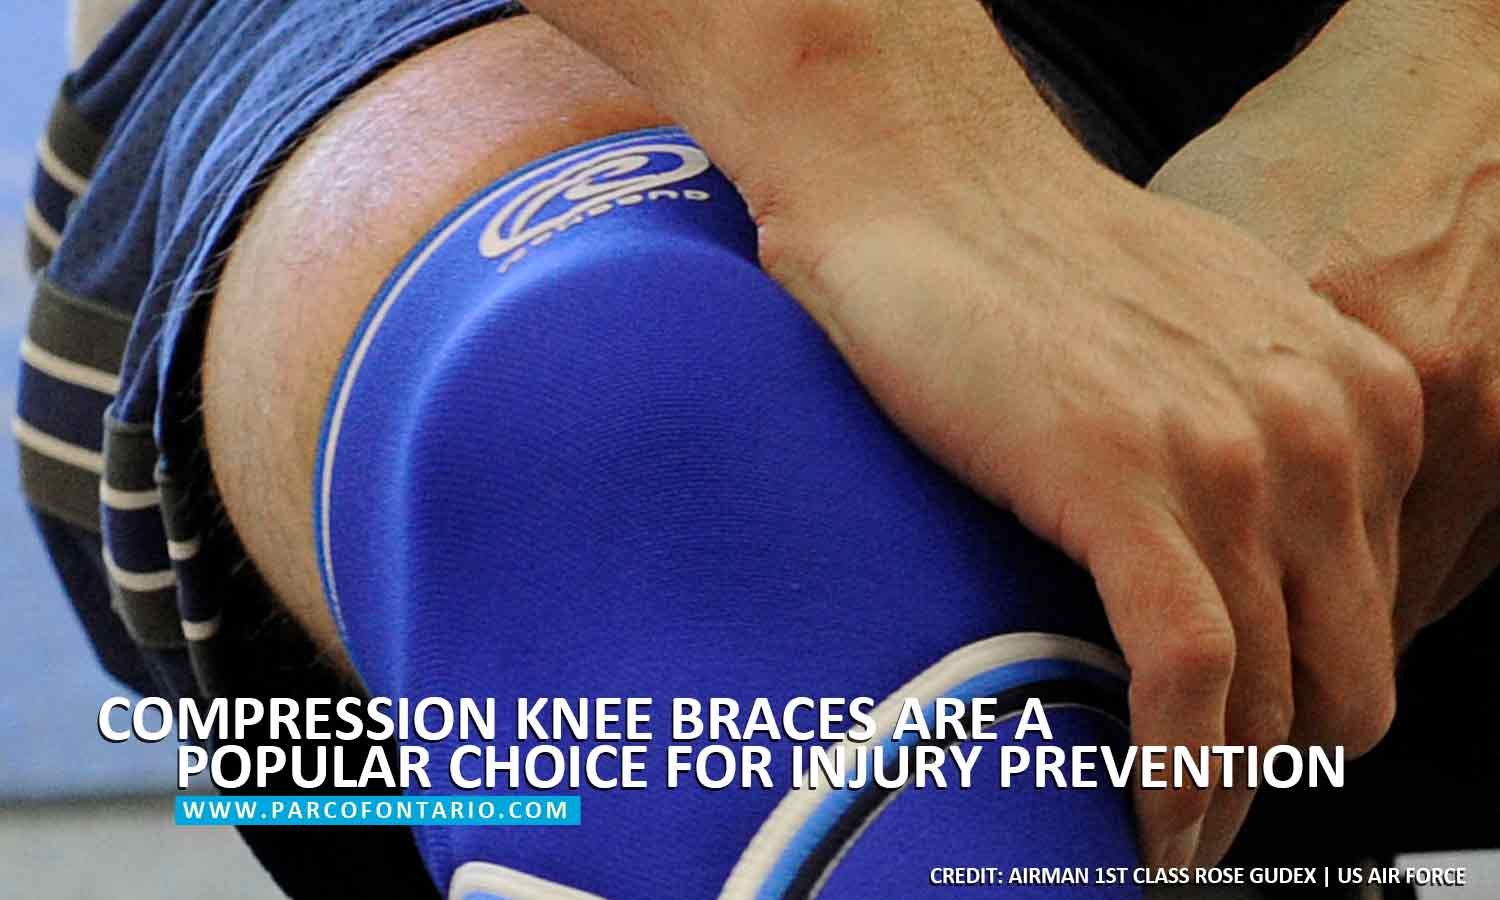 Choosing the best knee brace for patellofemoral pain syndrome